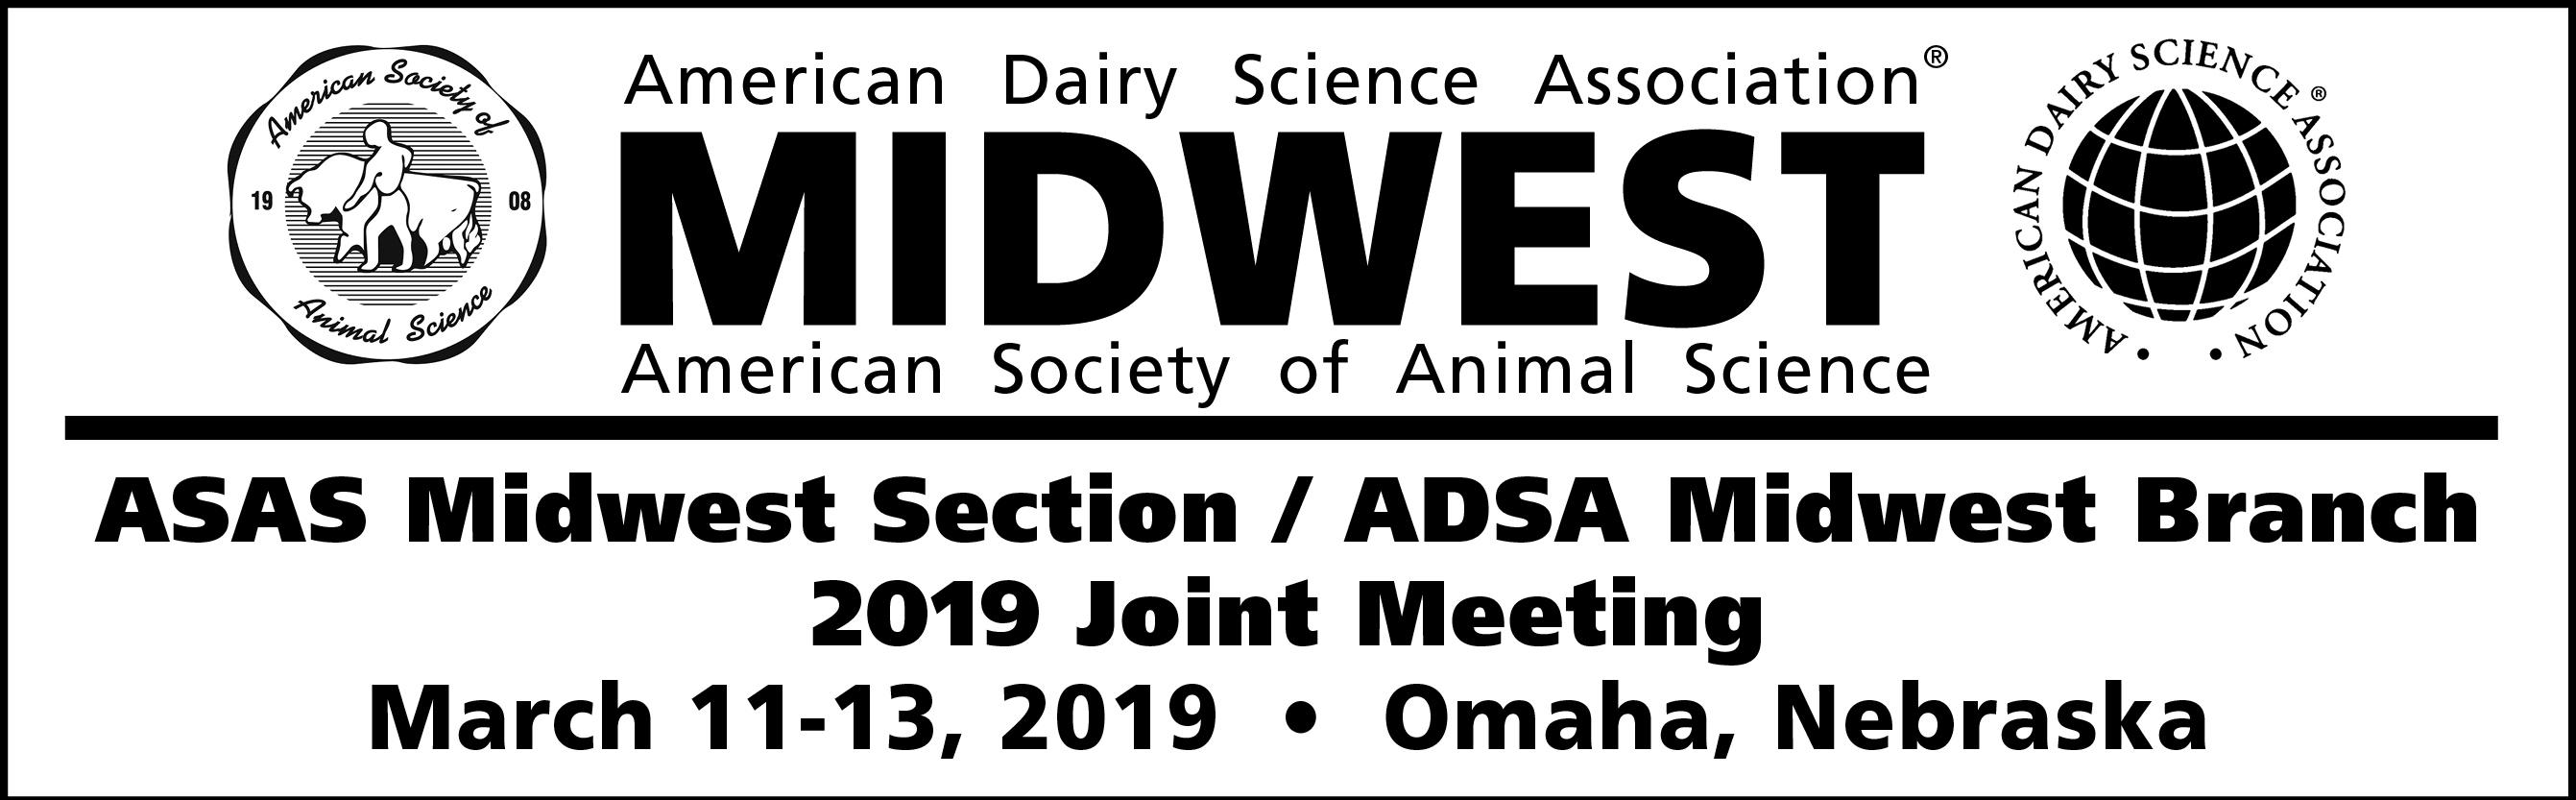 ASAS_ADSA_Midwest19_email